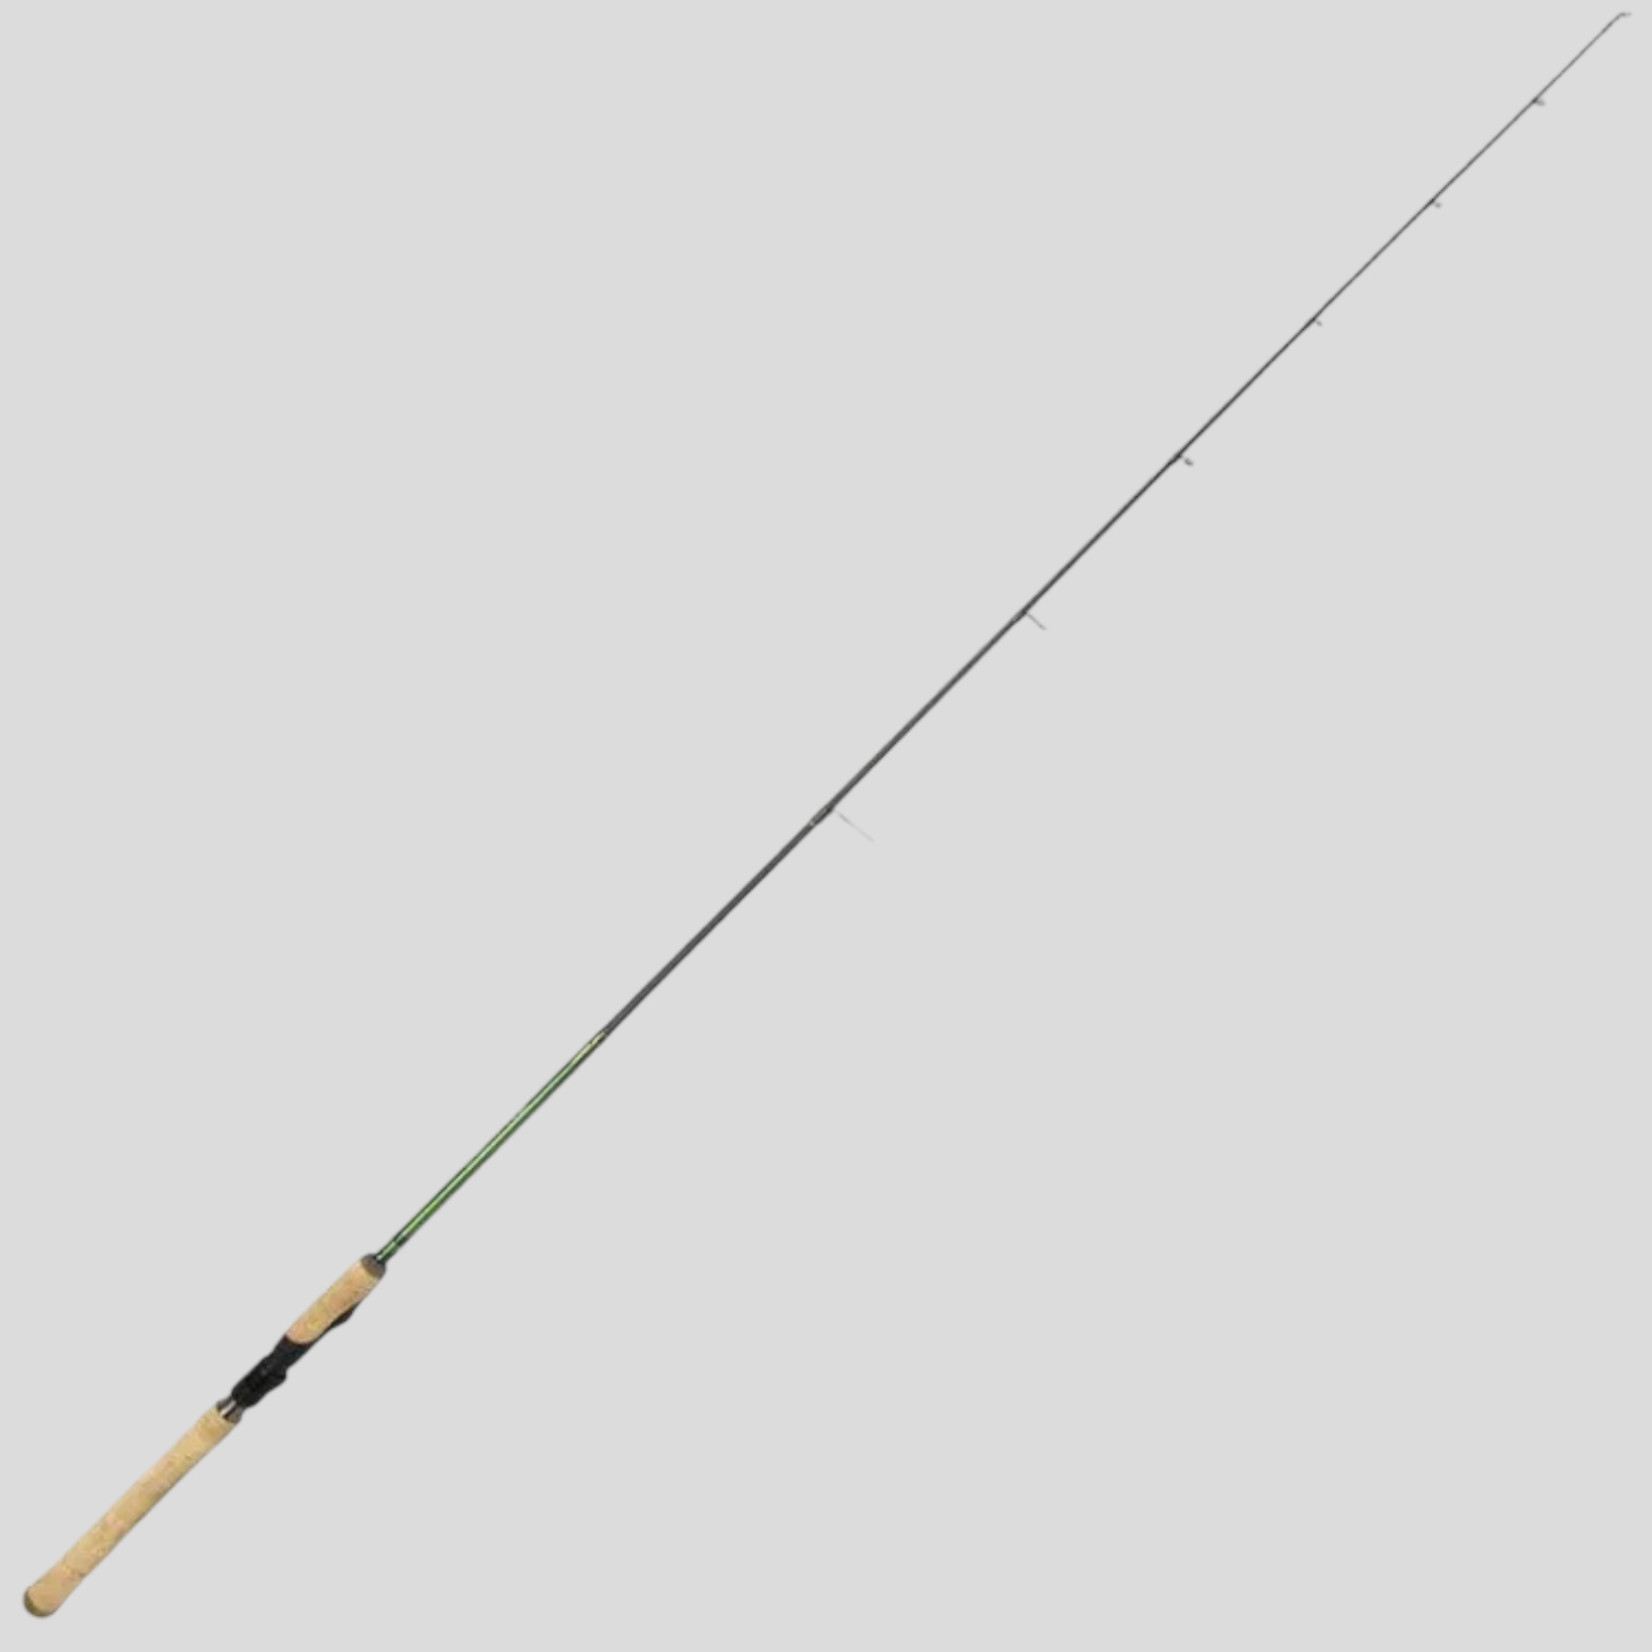 Shimano Compre Walleye Spinning Freshwater|Spinning Fishing Rods